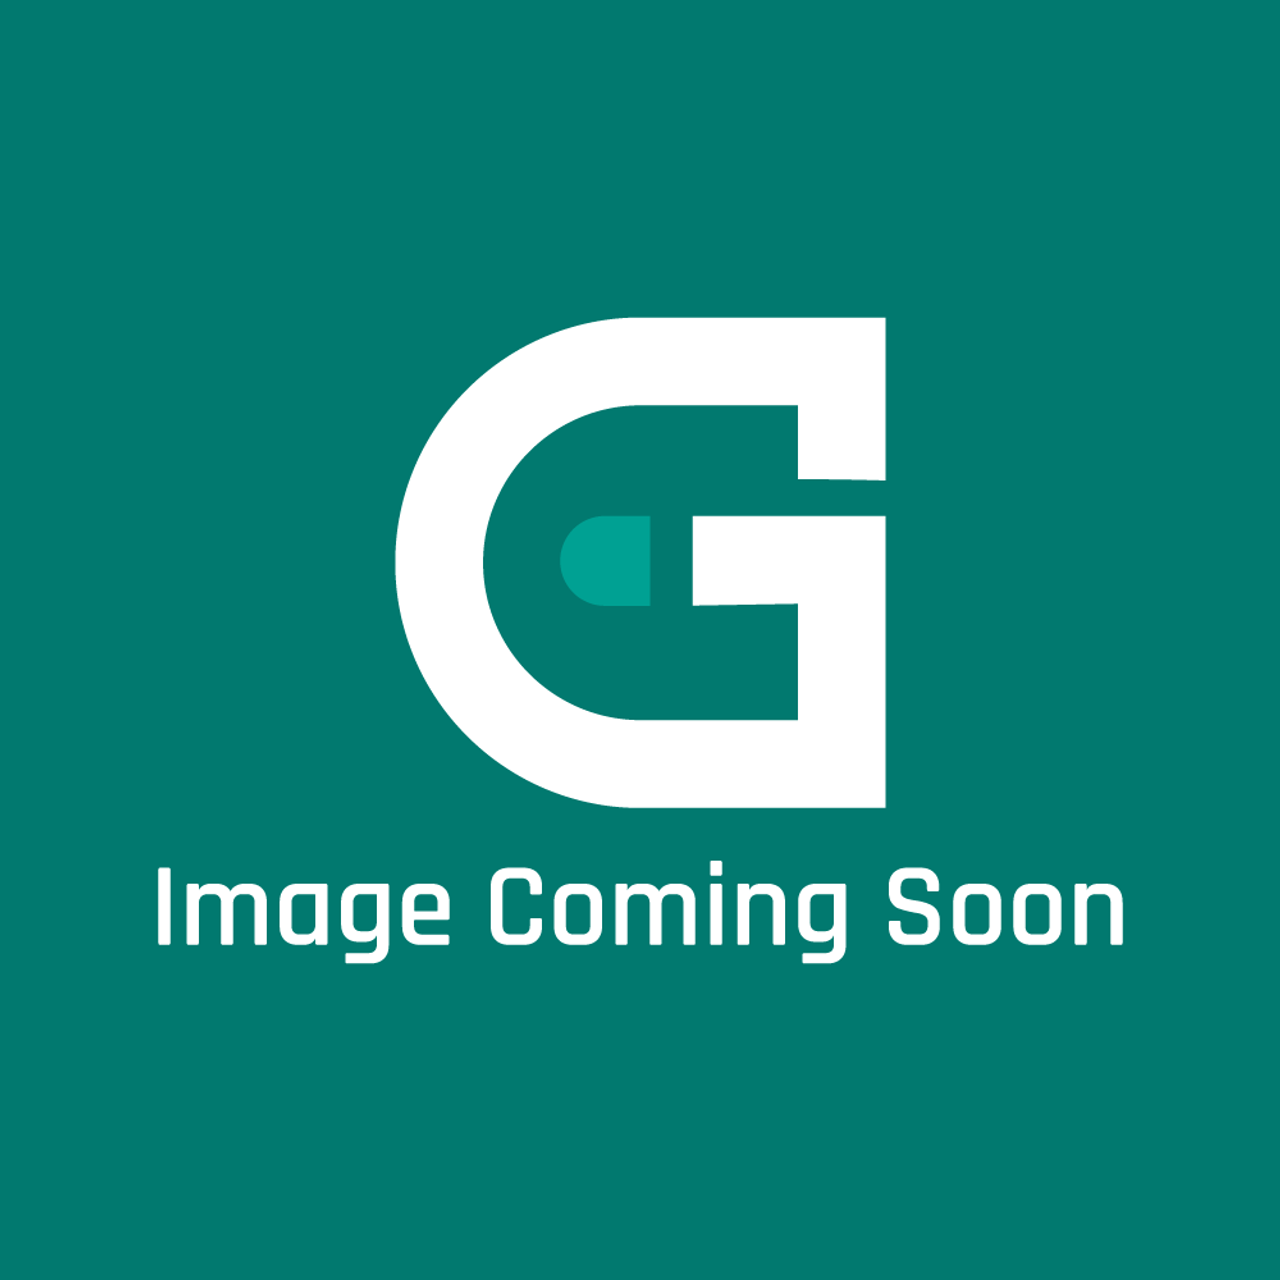 Frigidaire - Electrolux 5304503716 Outer Door - Image Coming Soon!